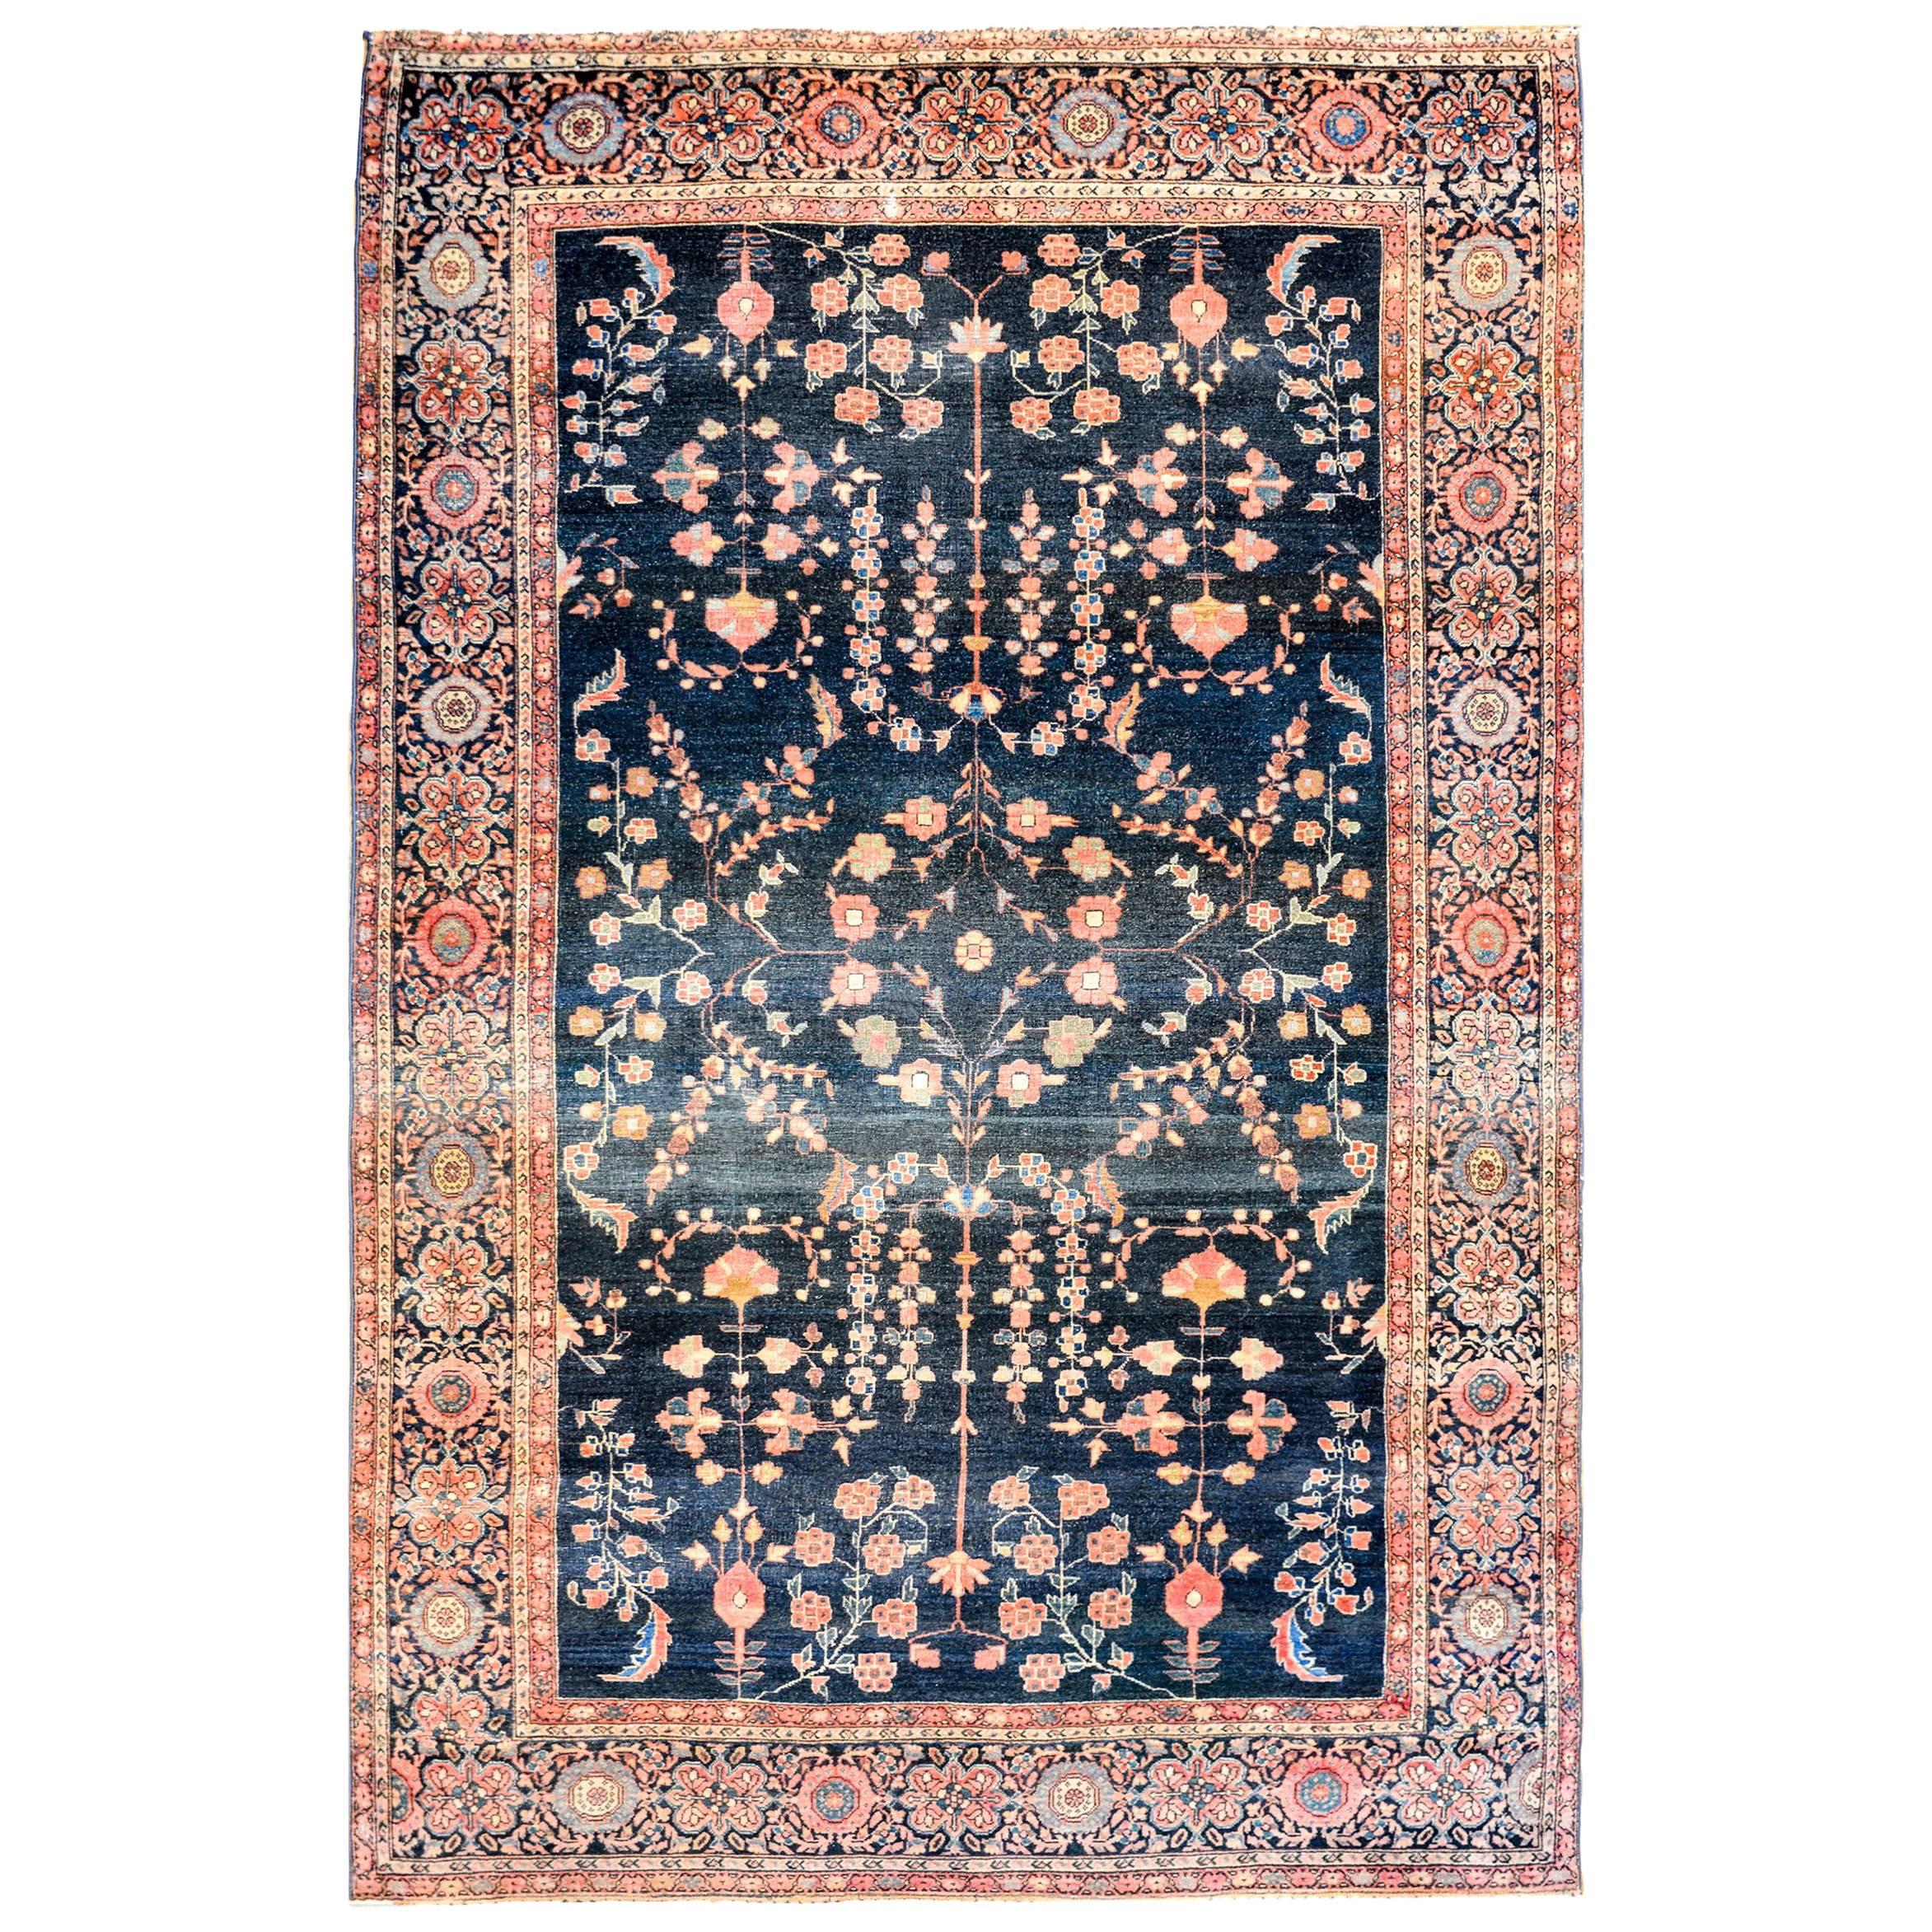 Exceptional Early 20th Century Sarouk Farahan Rug For Sale